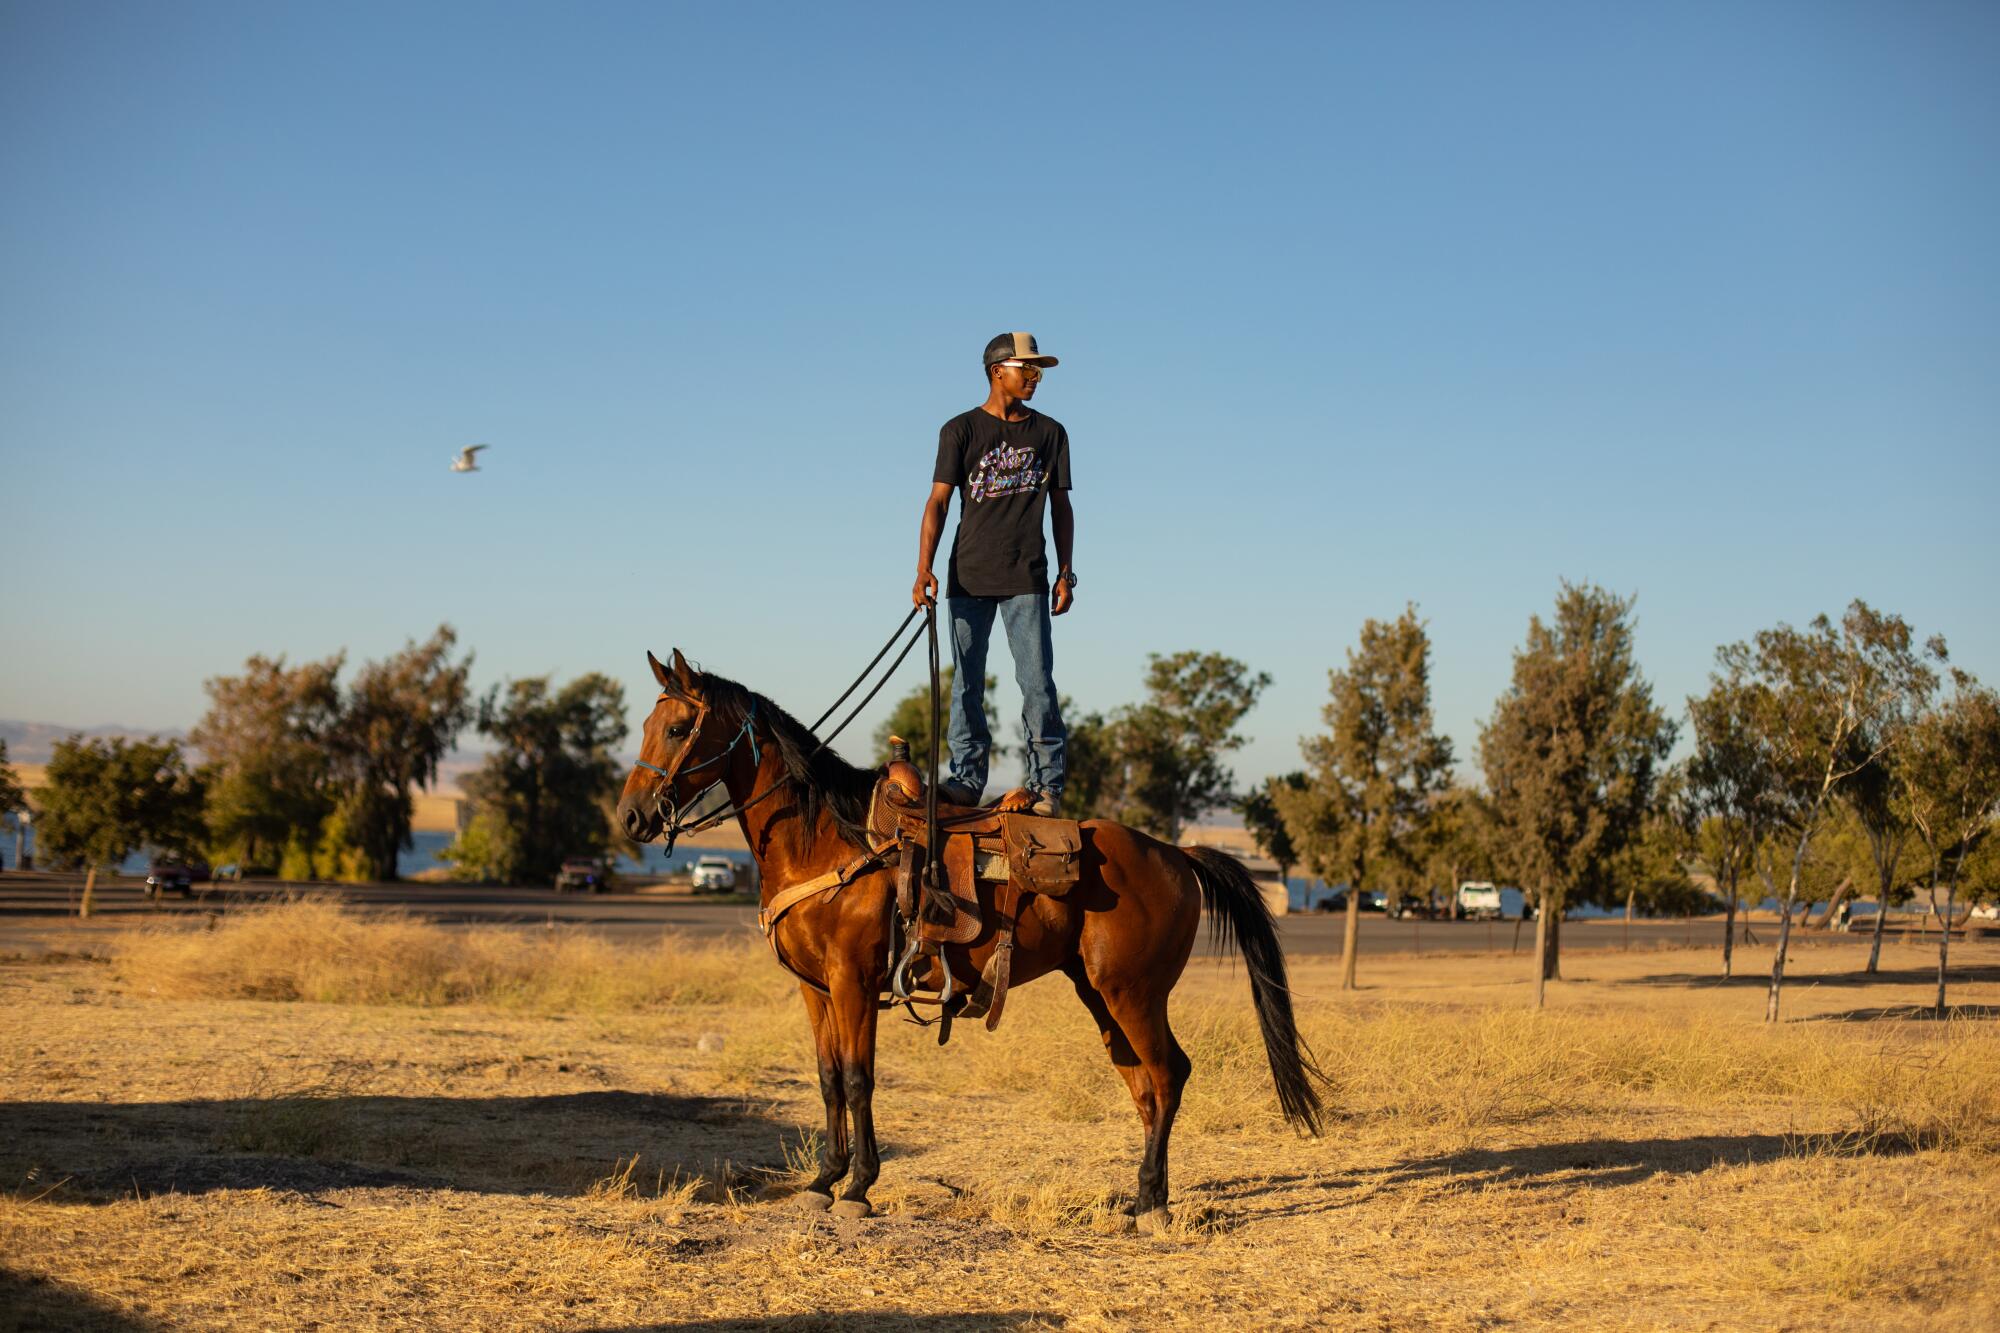 A horse standing in a field as cowboy stands on its back